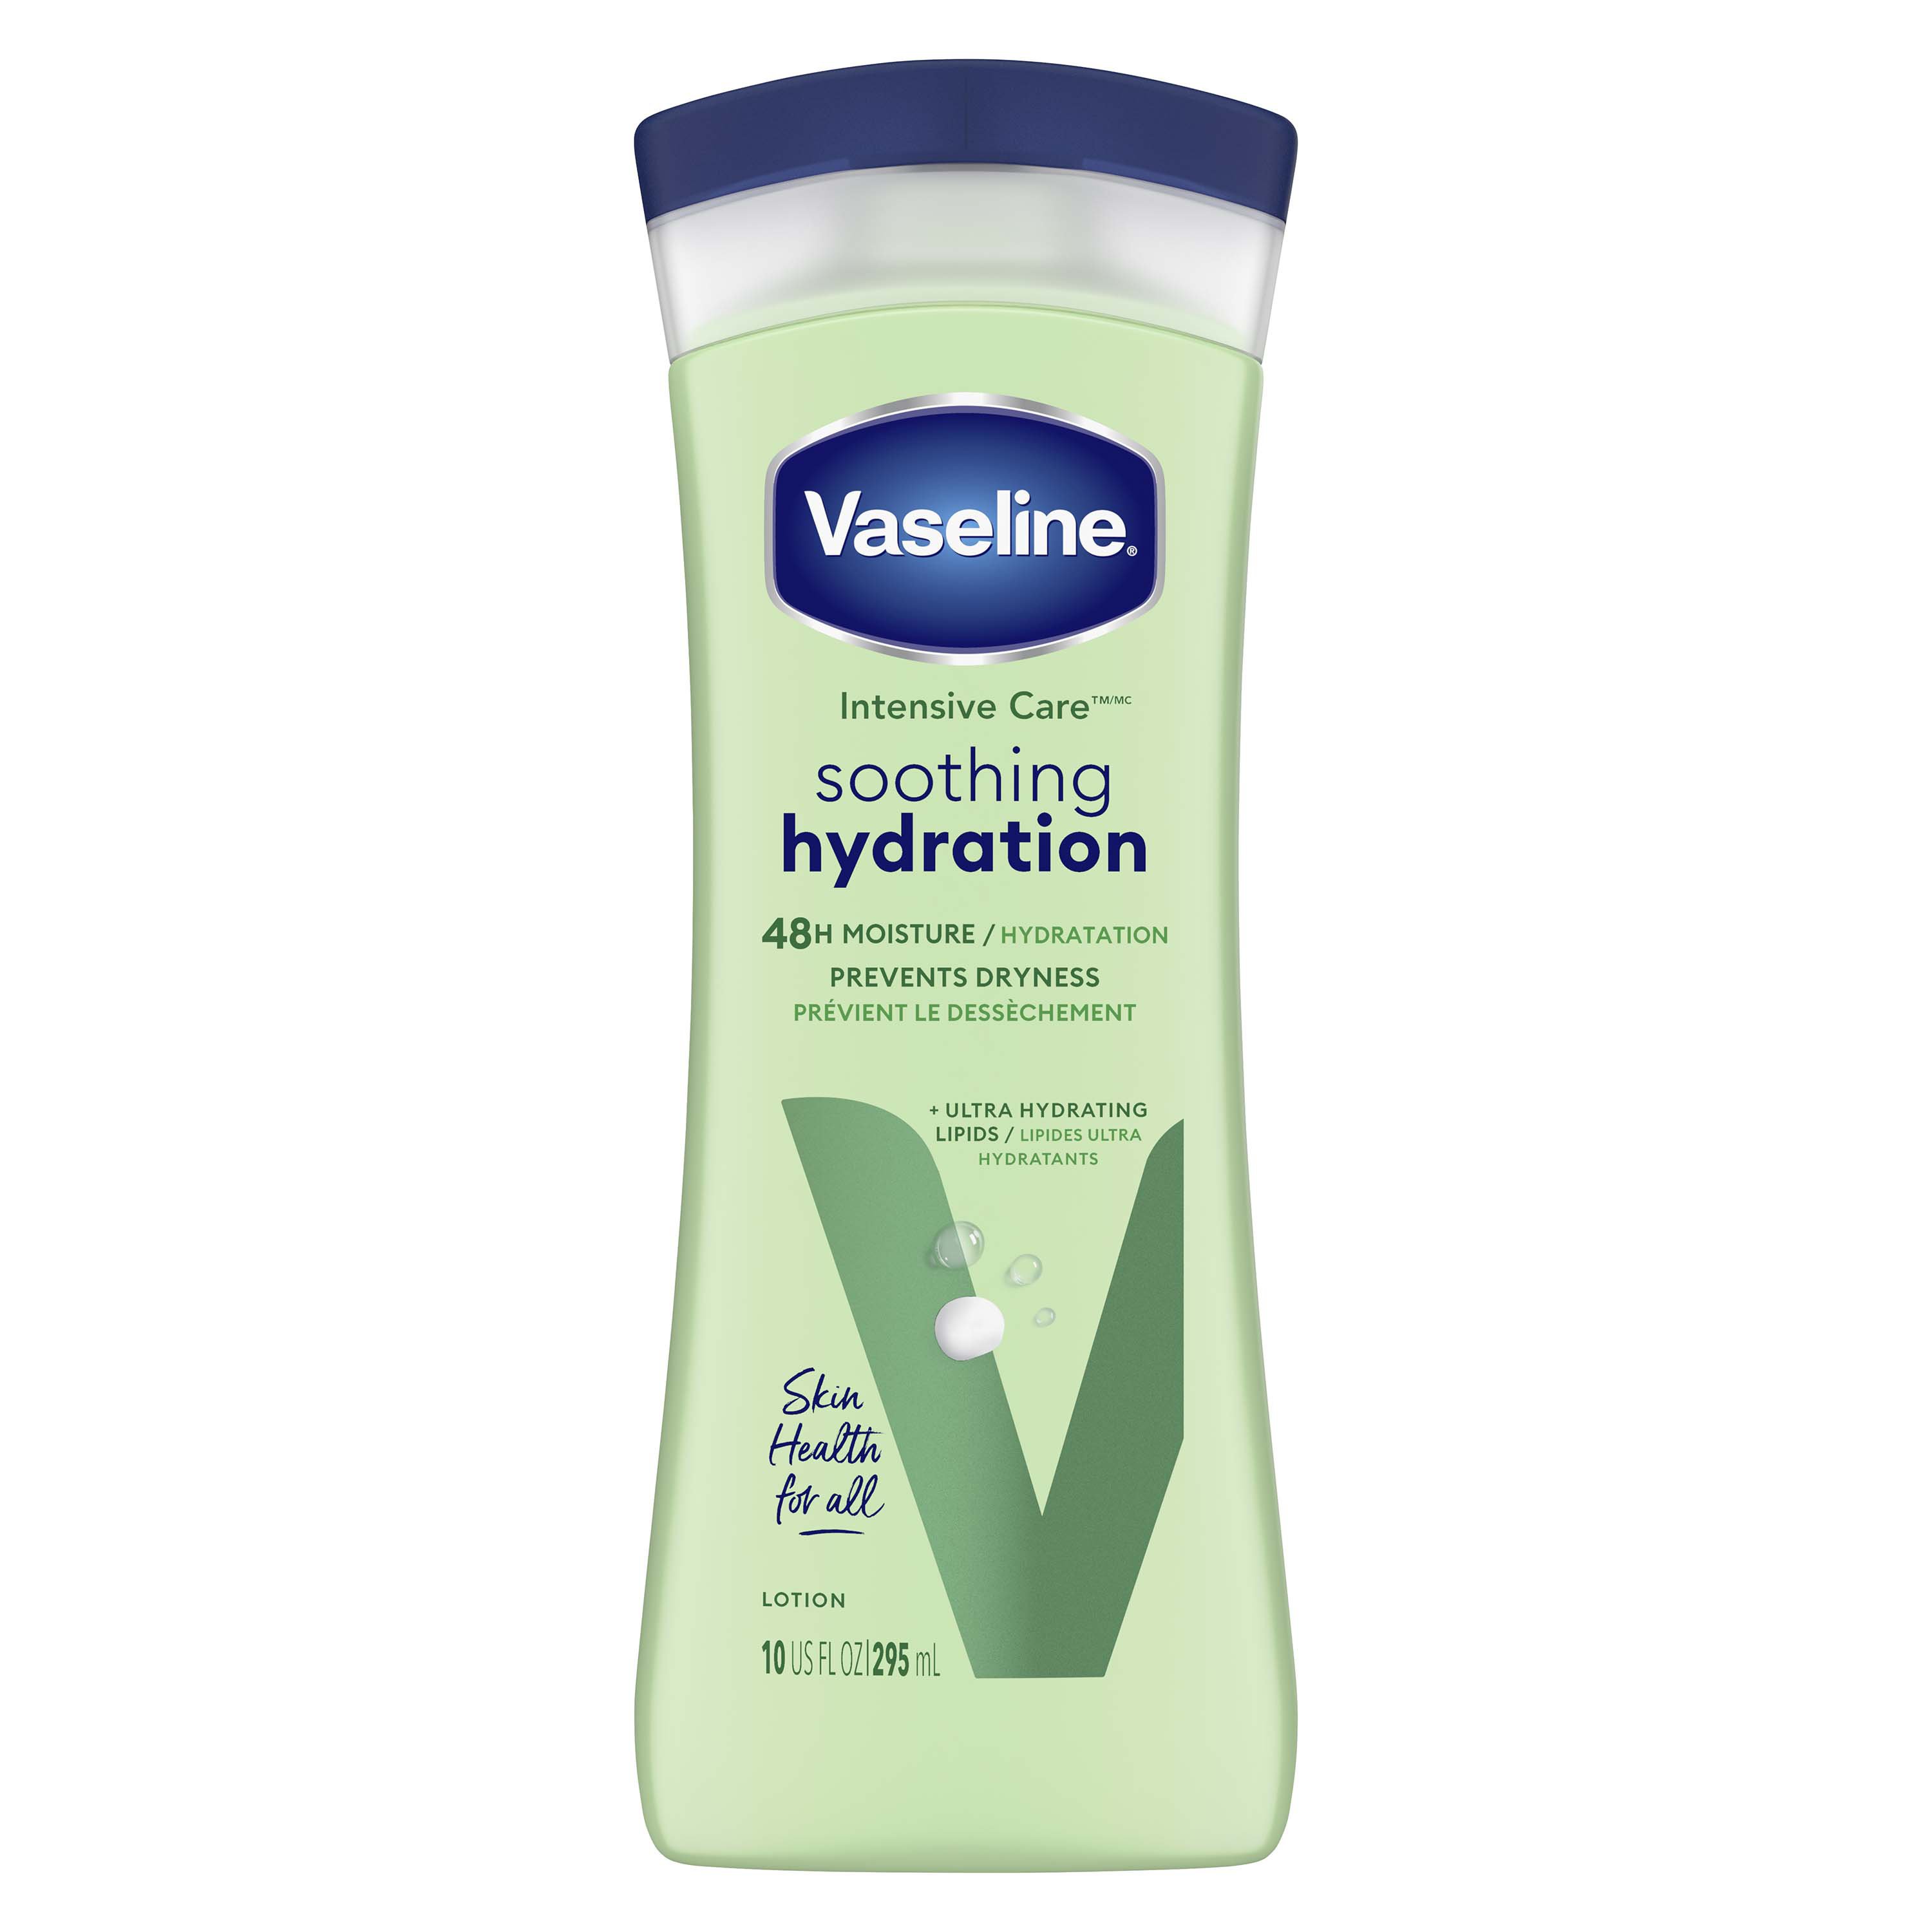 Vaseline Intensive Care Hand & Body Lotion - Soothing Hydration Body Lotion at H-E-B